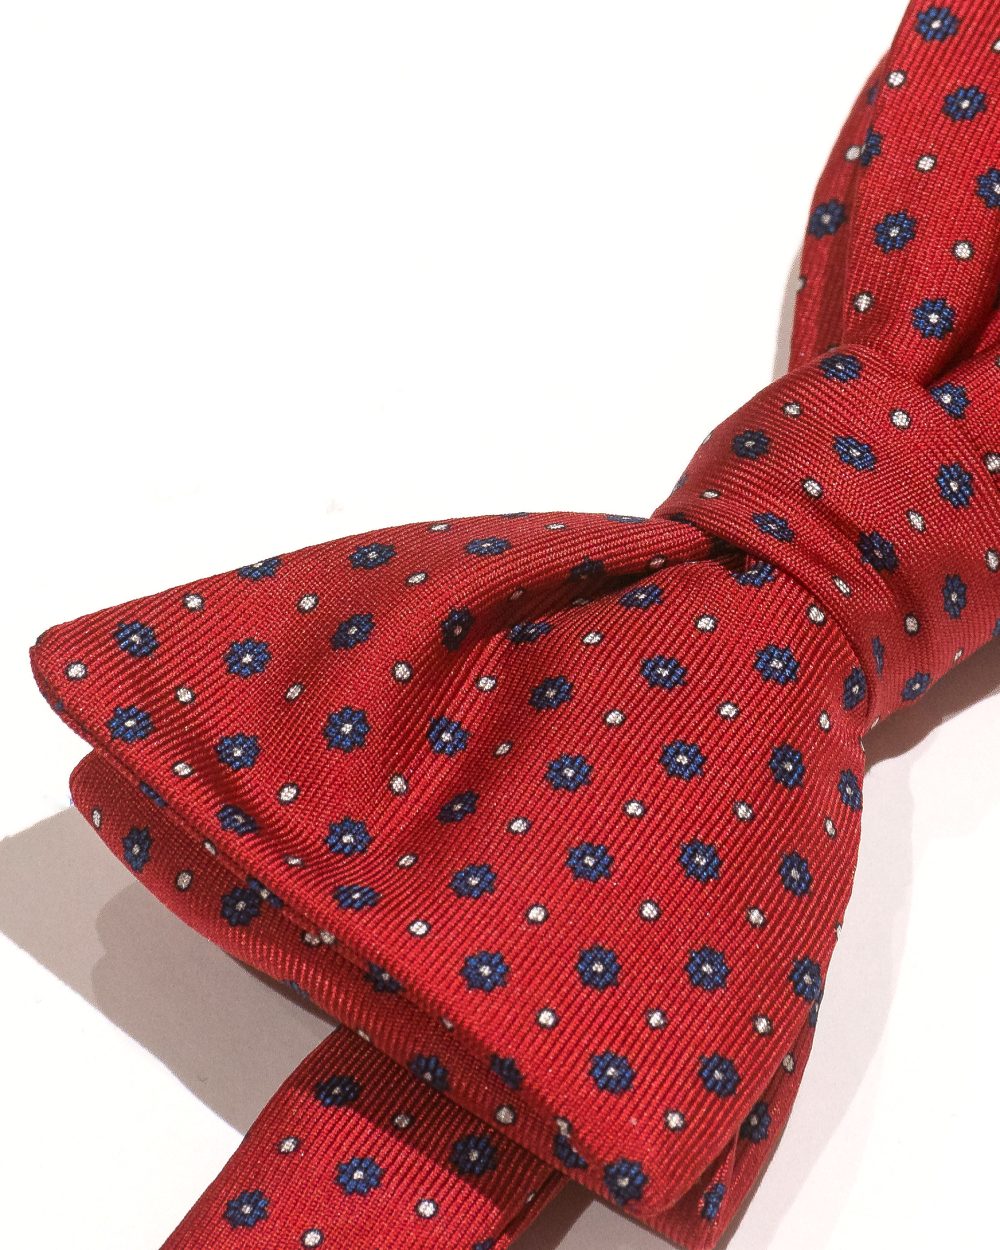 Bow Tie Butterfly Knot and Dots